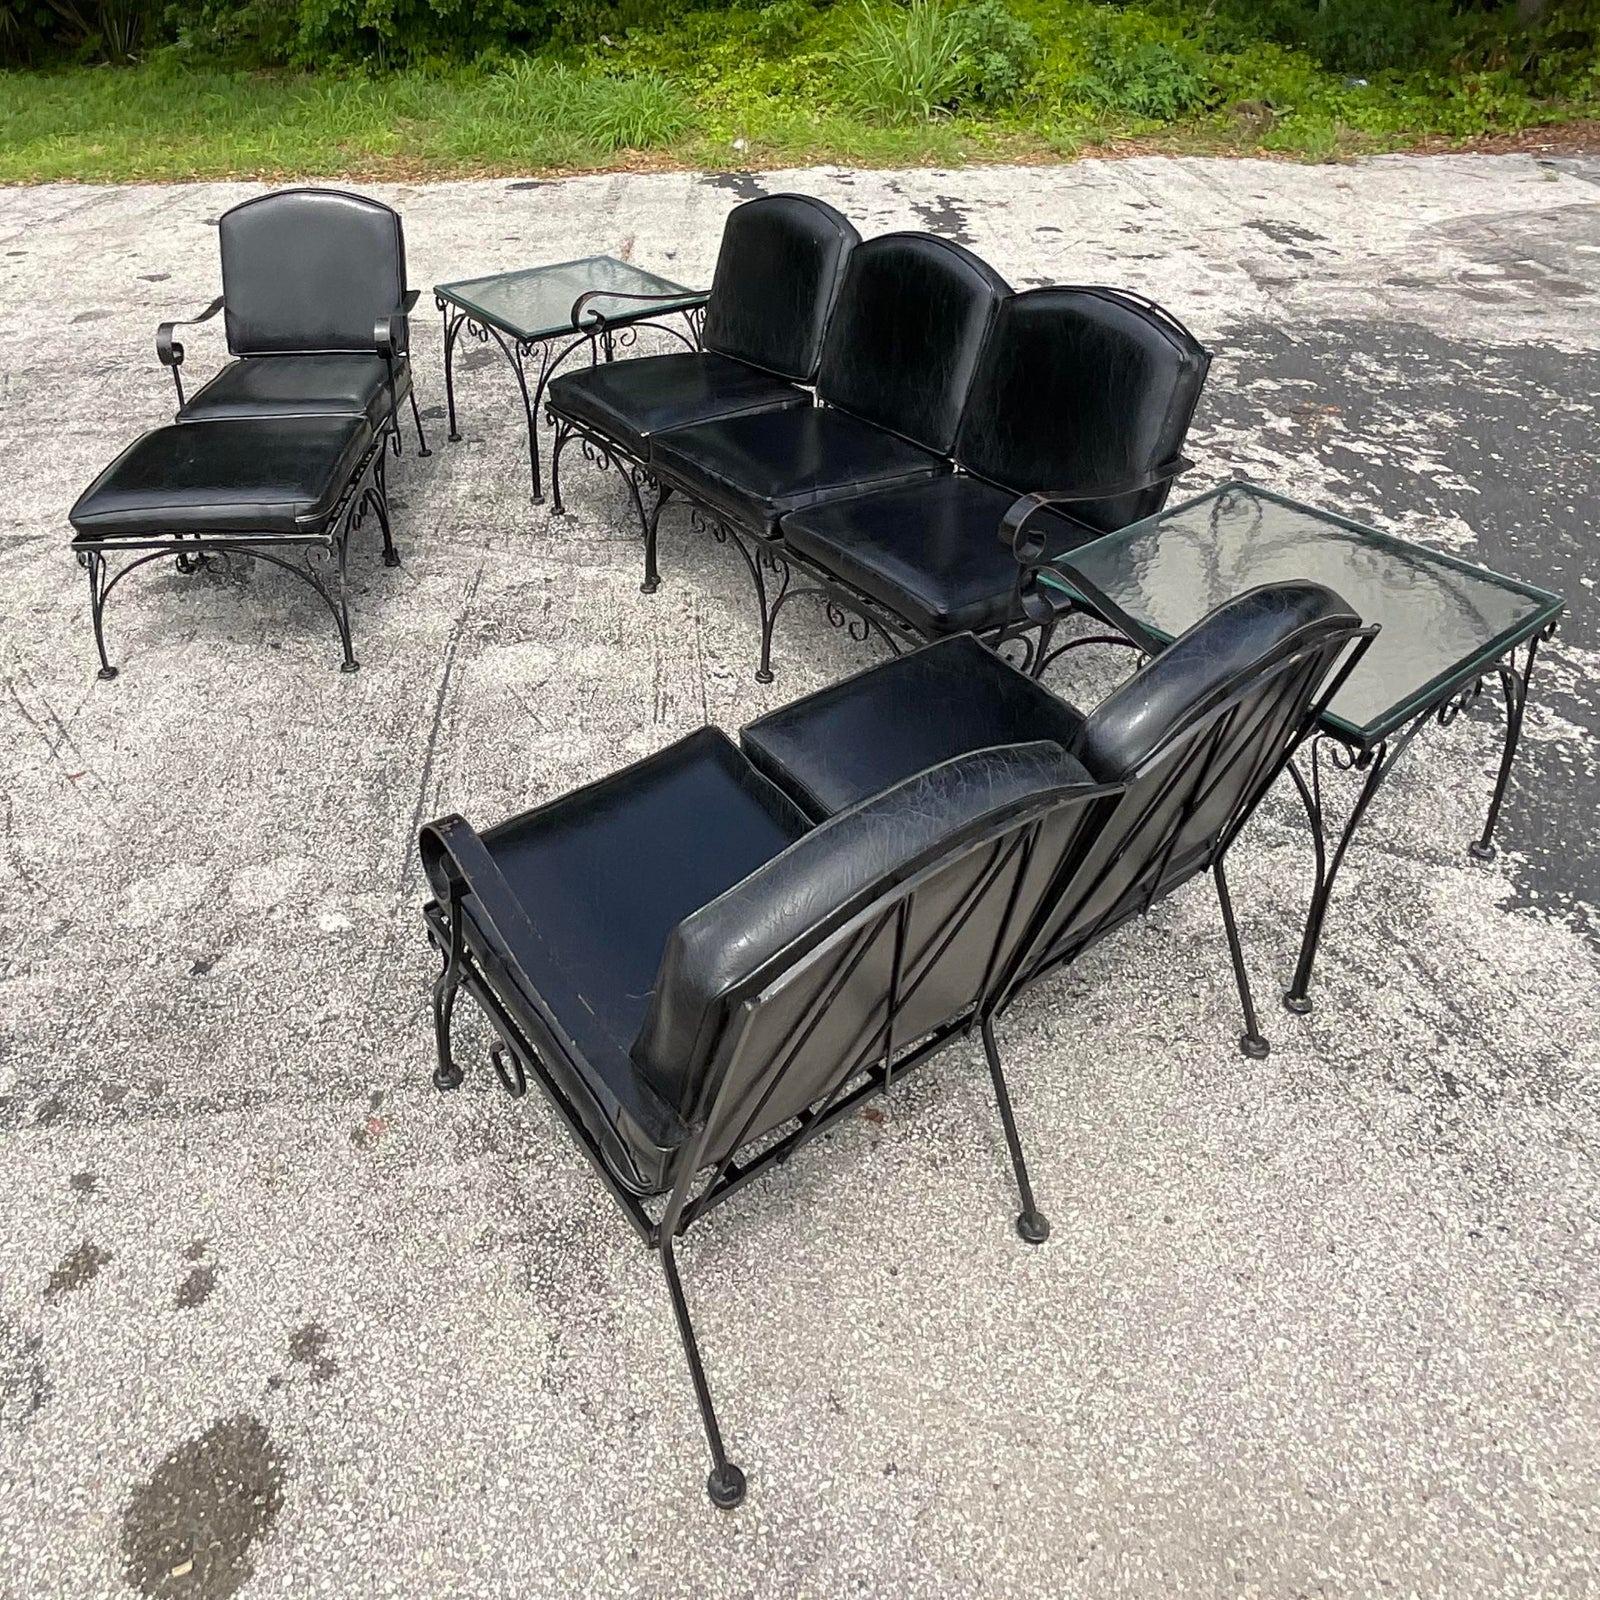 A fantastic vintage Regency outdoor patios set. Chic wrought iron in a gloss black finish. Coordinating cushions in a faux leather. Sofa, loveseat, lounge chair and ottoman and two side tables. The works! Acquired from a Palm Beach estate.

Sofa